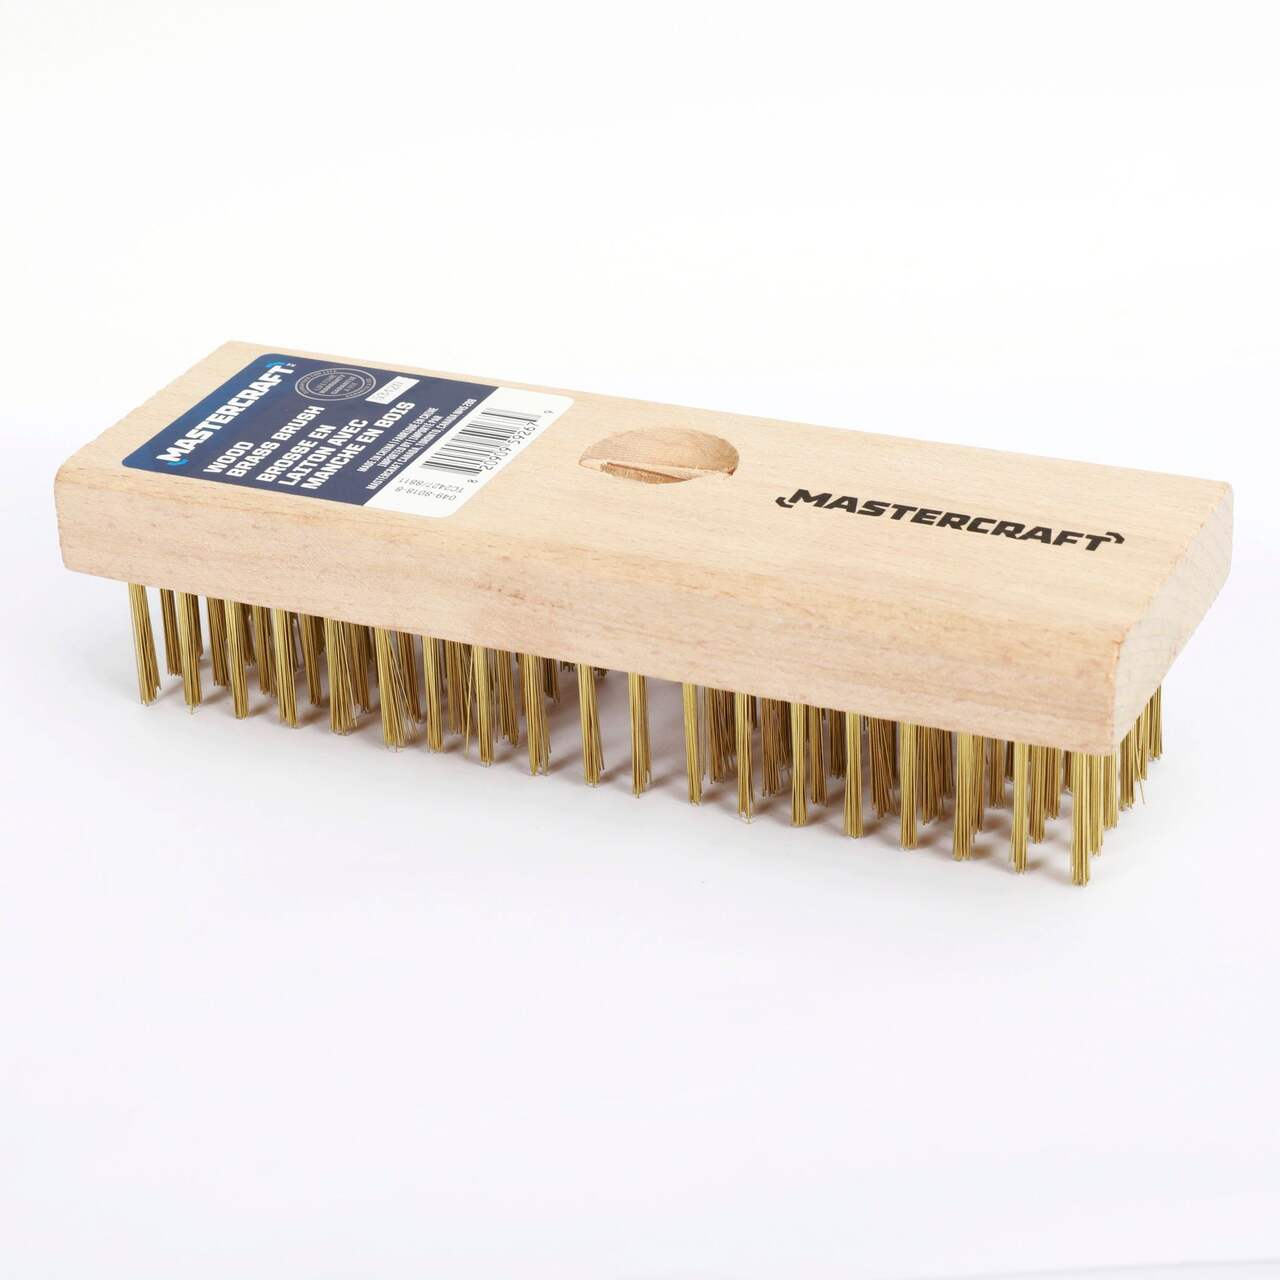 https://media-www.canadiantire.ca/product/fixing/paint/surface-prep-maintenance/0498018/block-brass-wire-brush-14de6680-d157-4359-bdd8-7f625eaaa471-jpgrendition.jpg?imdensity=1&imwidth=640&impolicy=mZoom